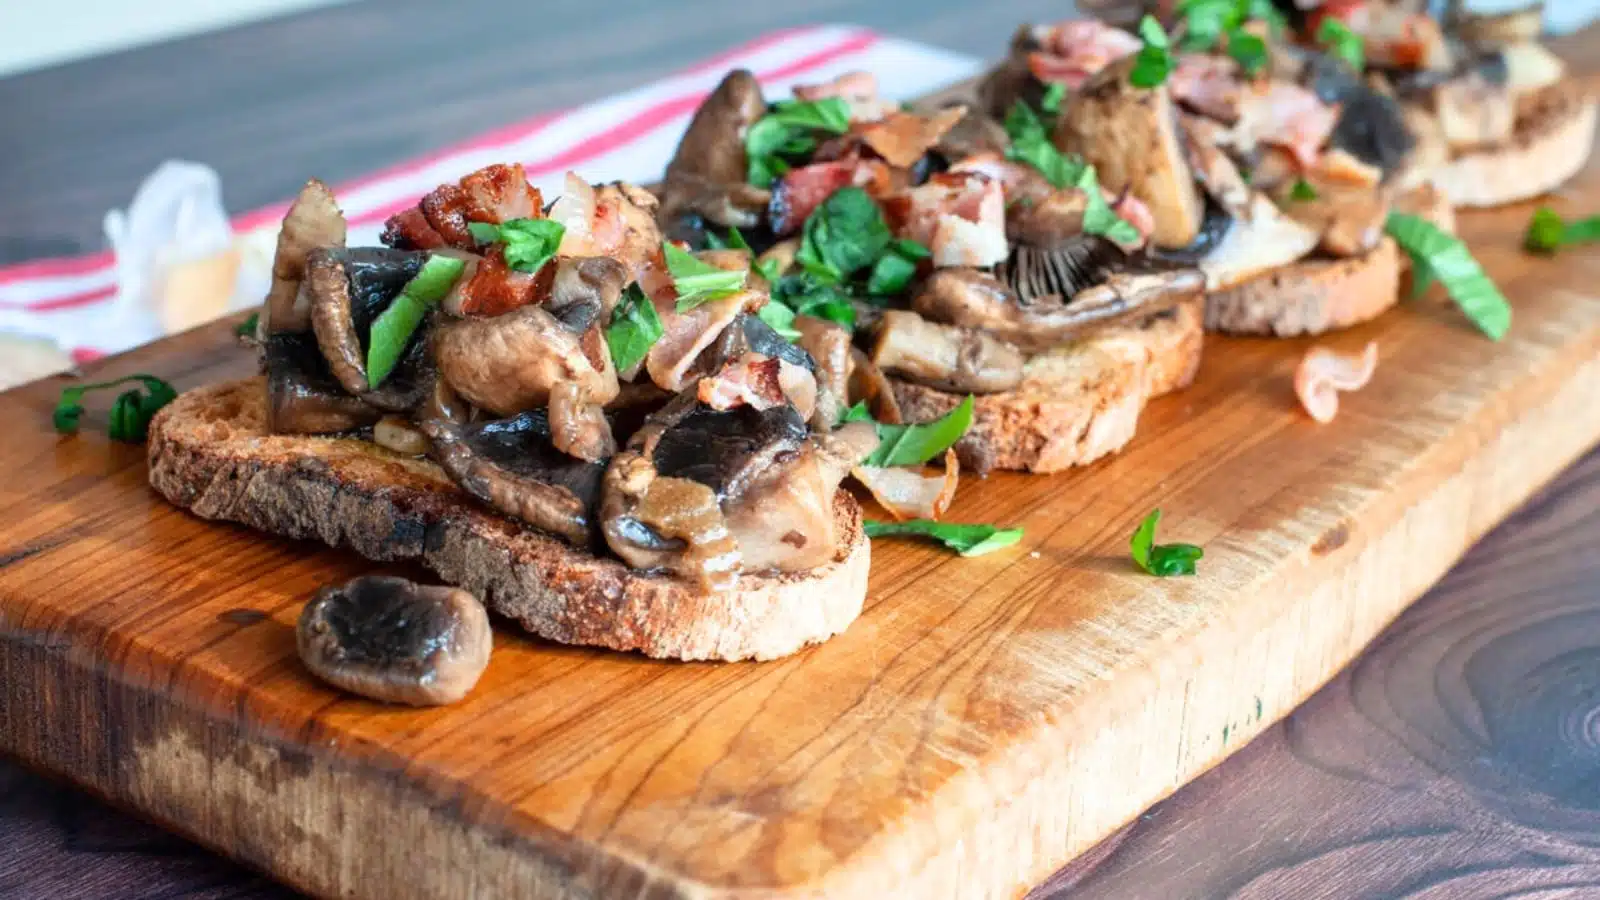 a wooden board with slices of toasted bread with sauteed mushrooms on it